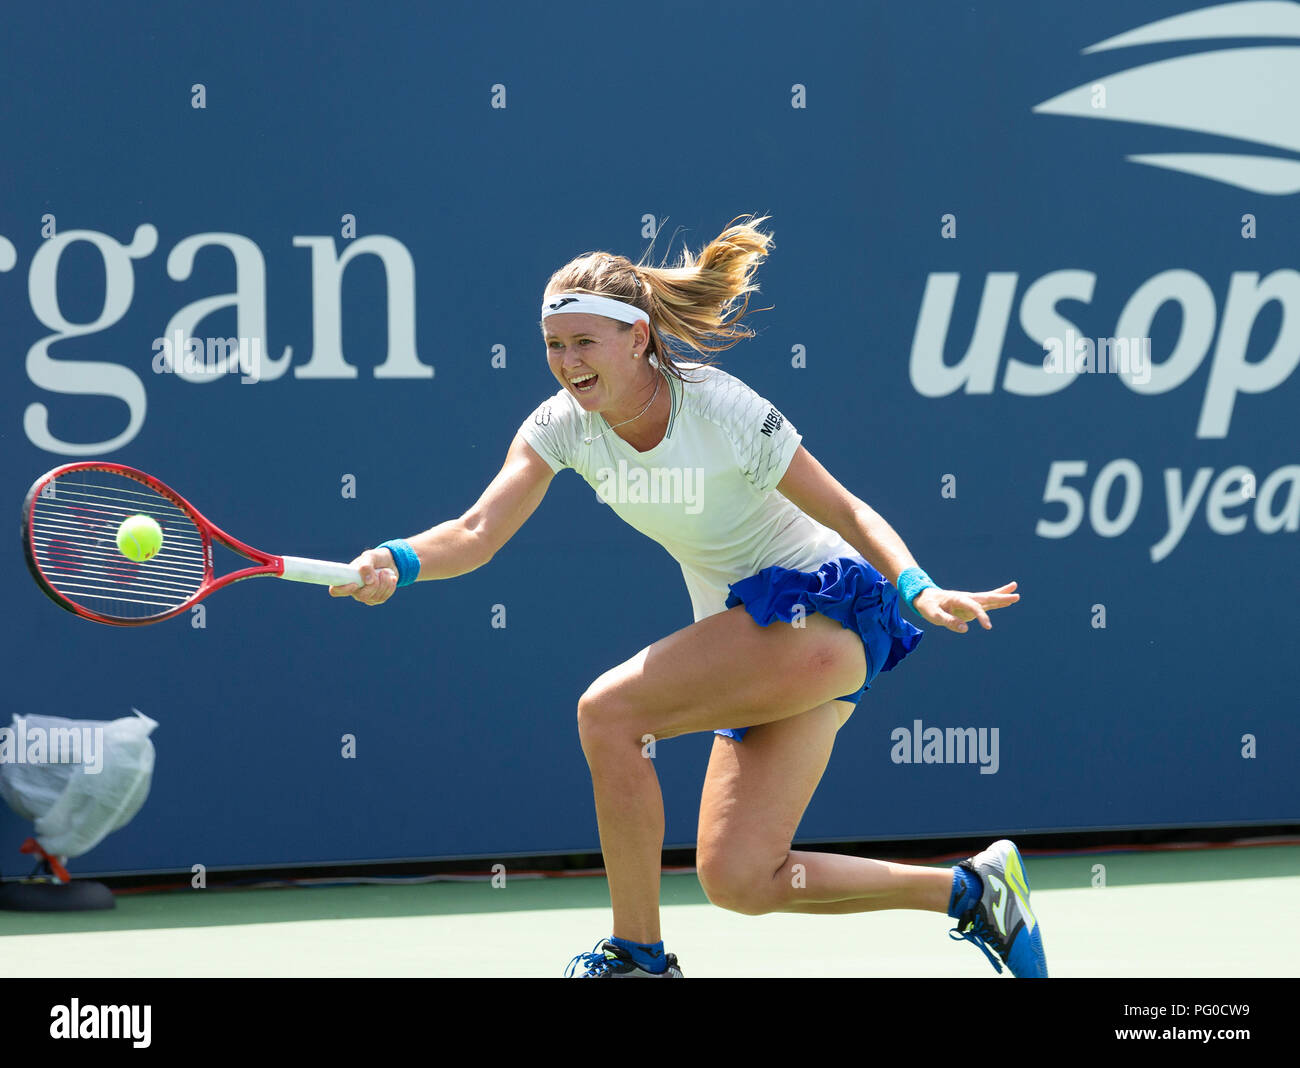 New York, United States. 21st Aug, 2018. Marie Bouzkova of Czech Republic  returns ball during qualifying day 1 against Ann Li of USA at US Open Tennis  championship at USTA Billie Jean